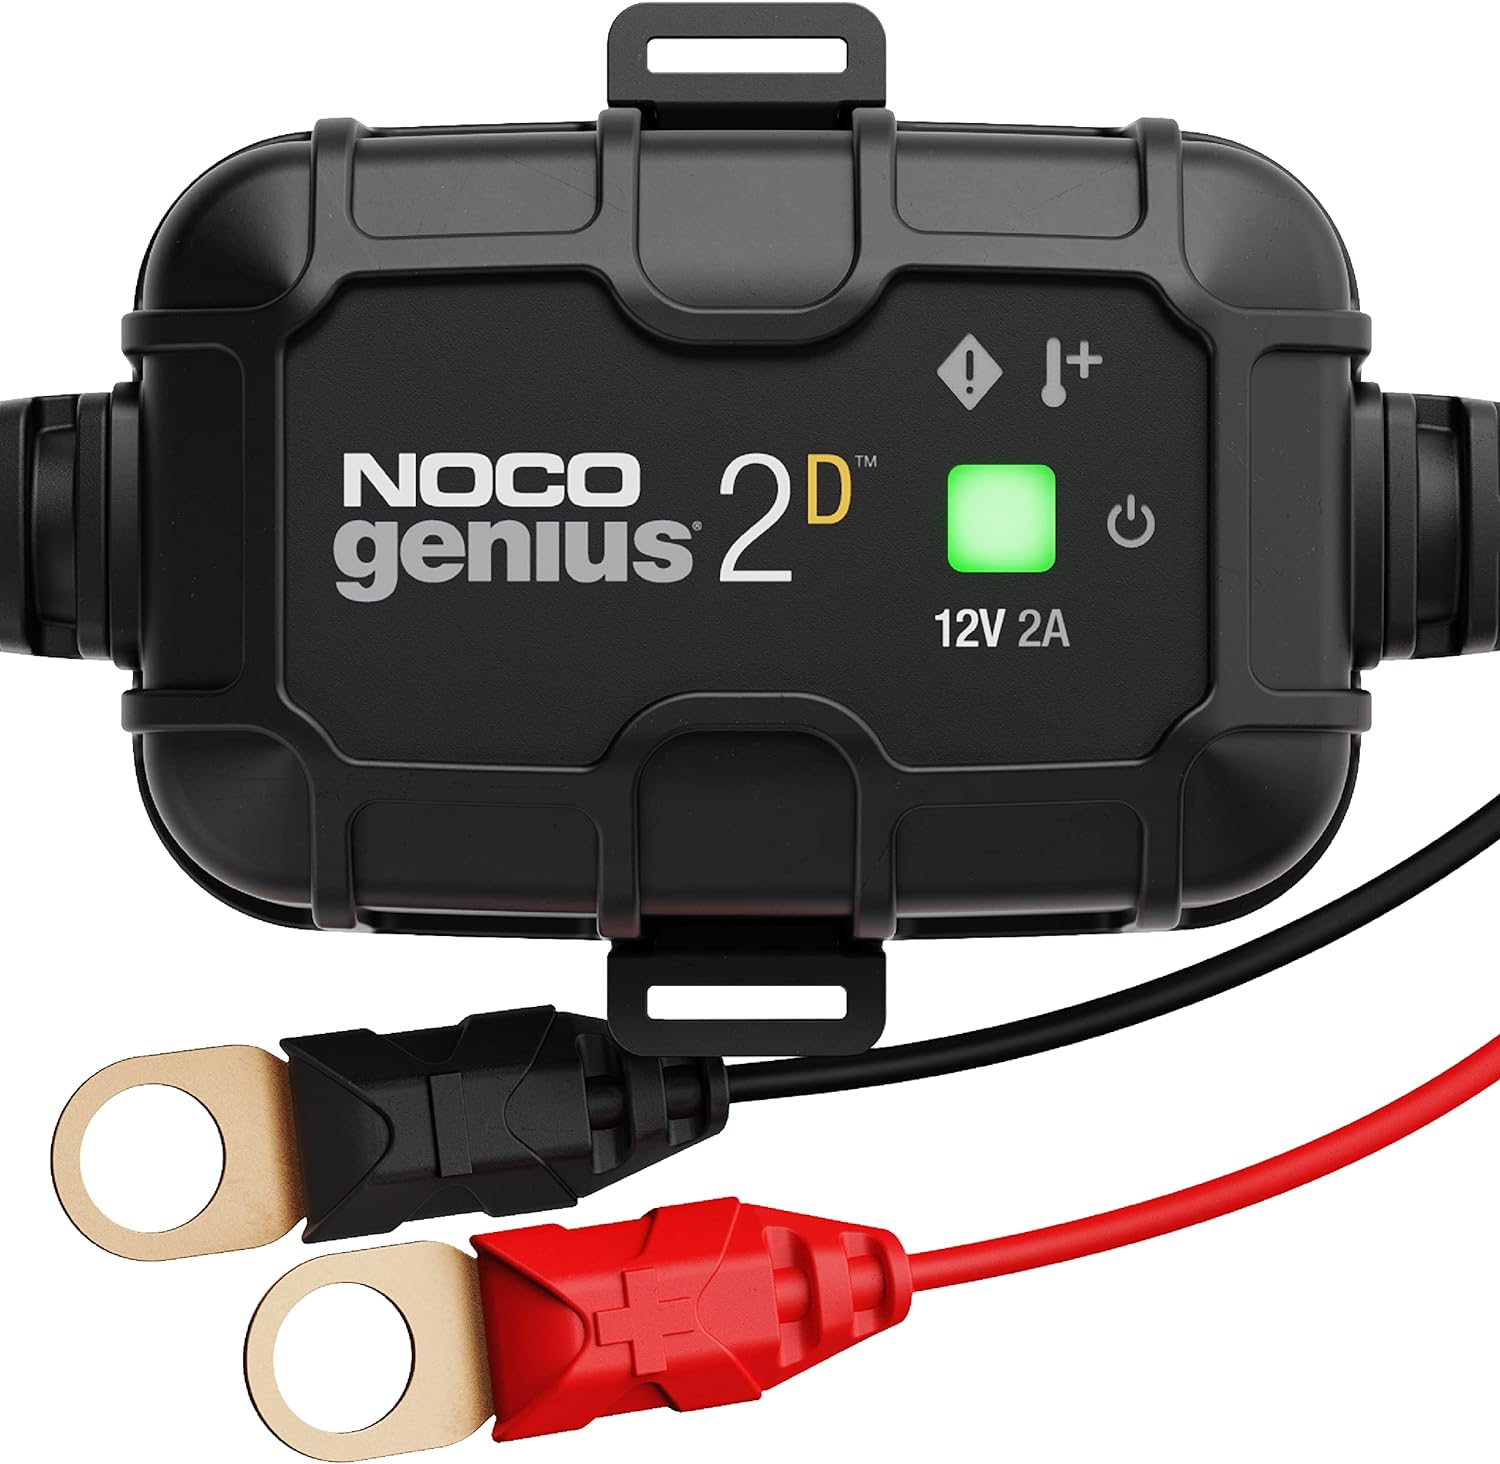 NOCO GENIUS2D, 2A Direct-Mount Onboard Car Battery Charger, 12V Automotive Charger, Battery Maintainer, Trickle Charger, Float Charger and Desulfator for Marine, ATV, Truck and Deep Cycle Batteries - NOCO GENIUS2D Review